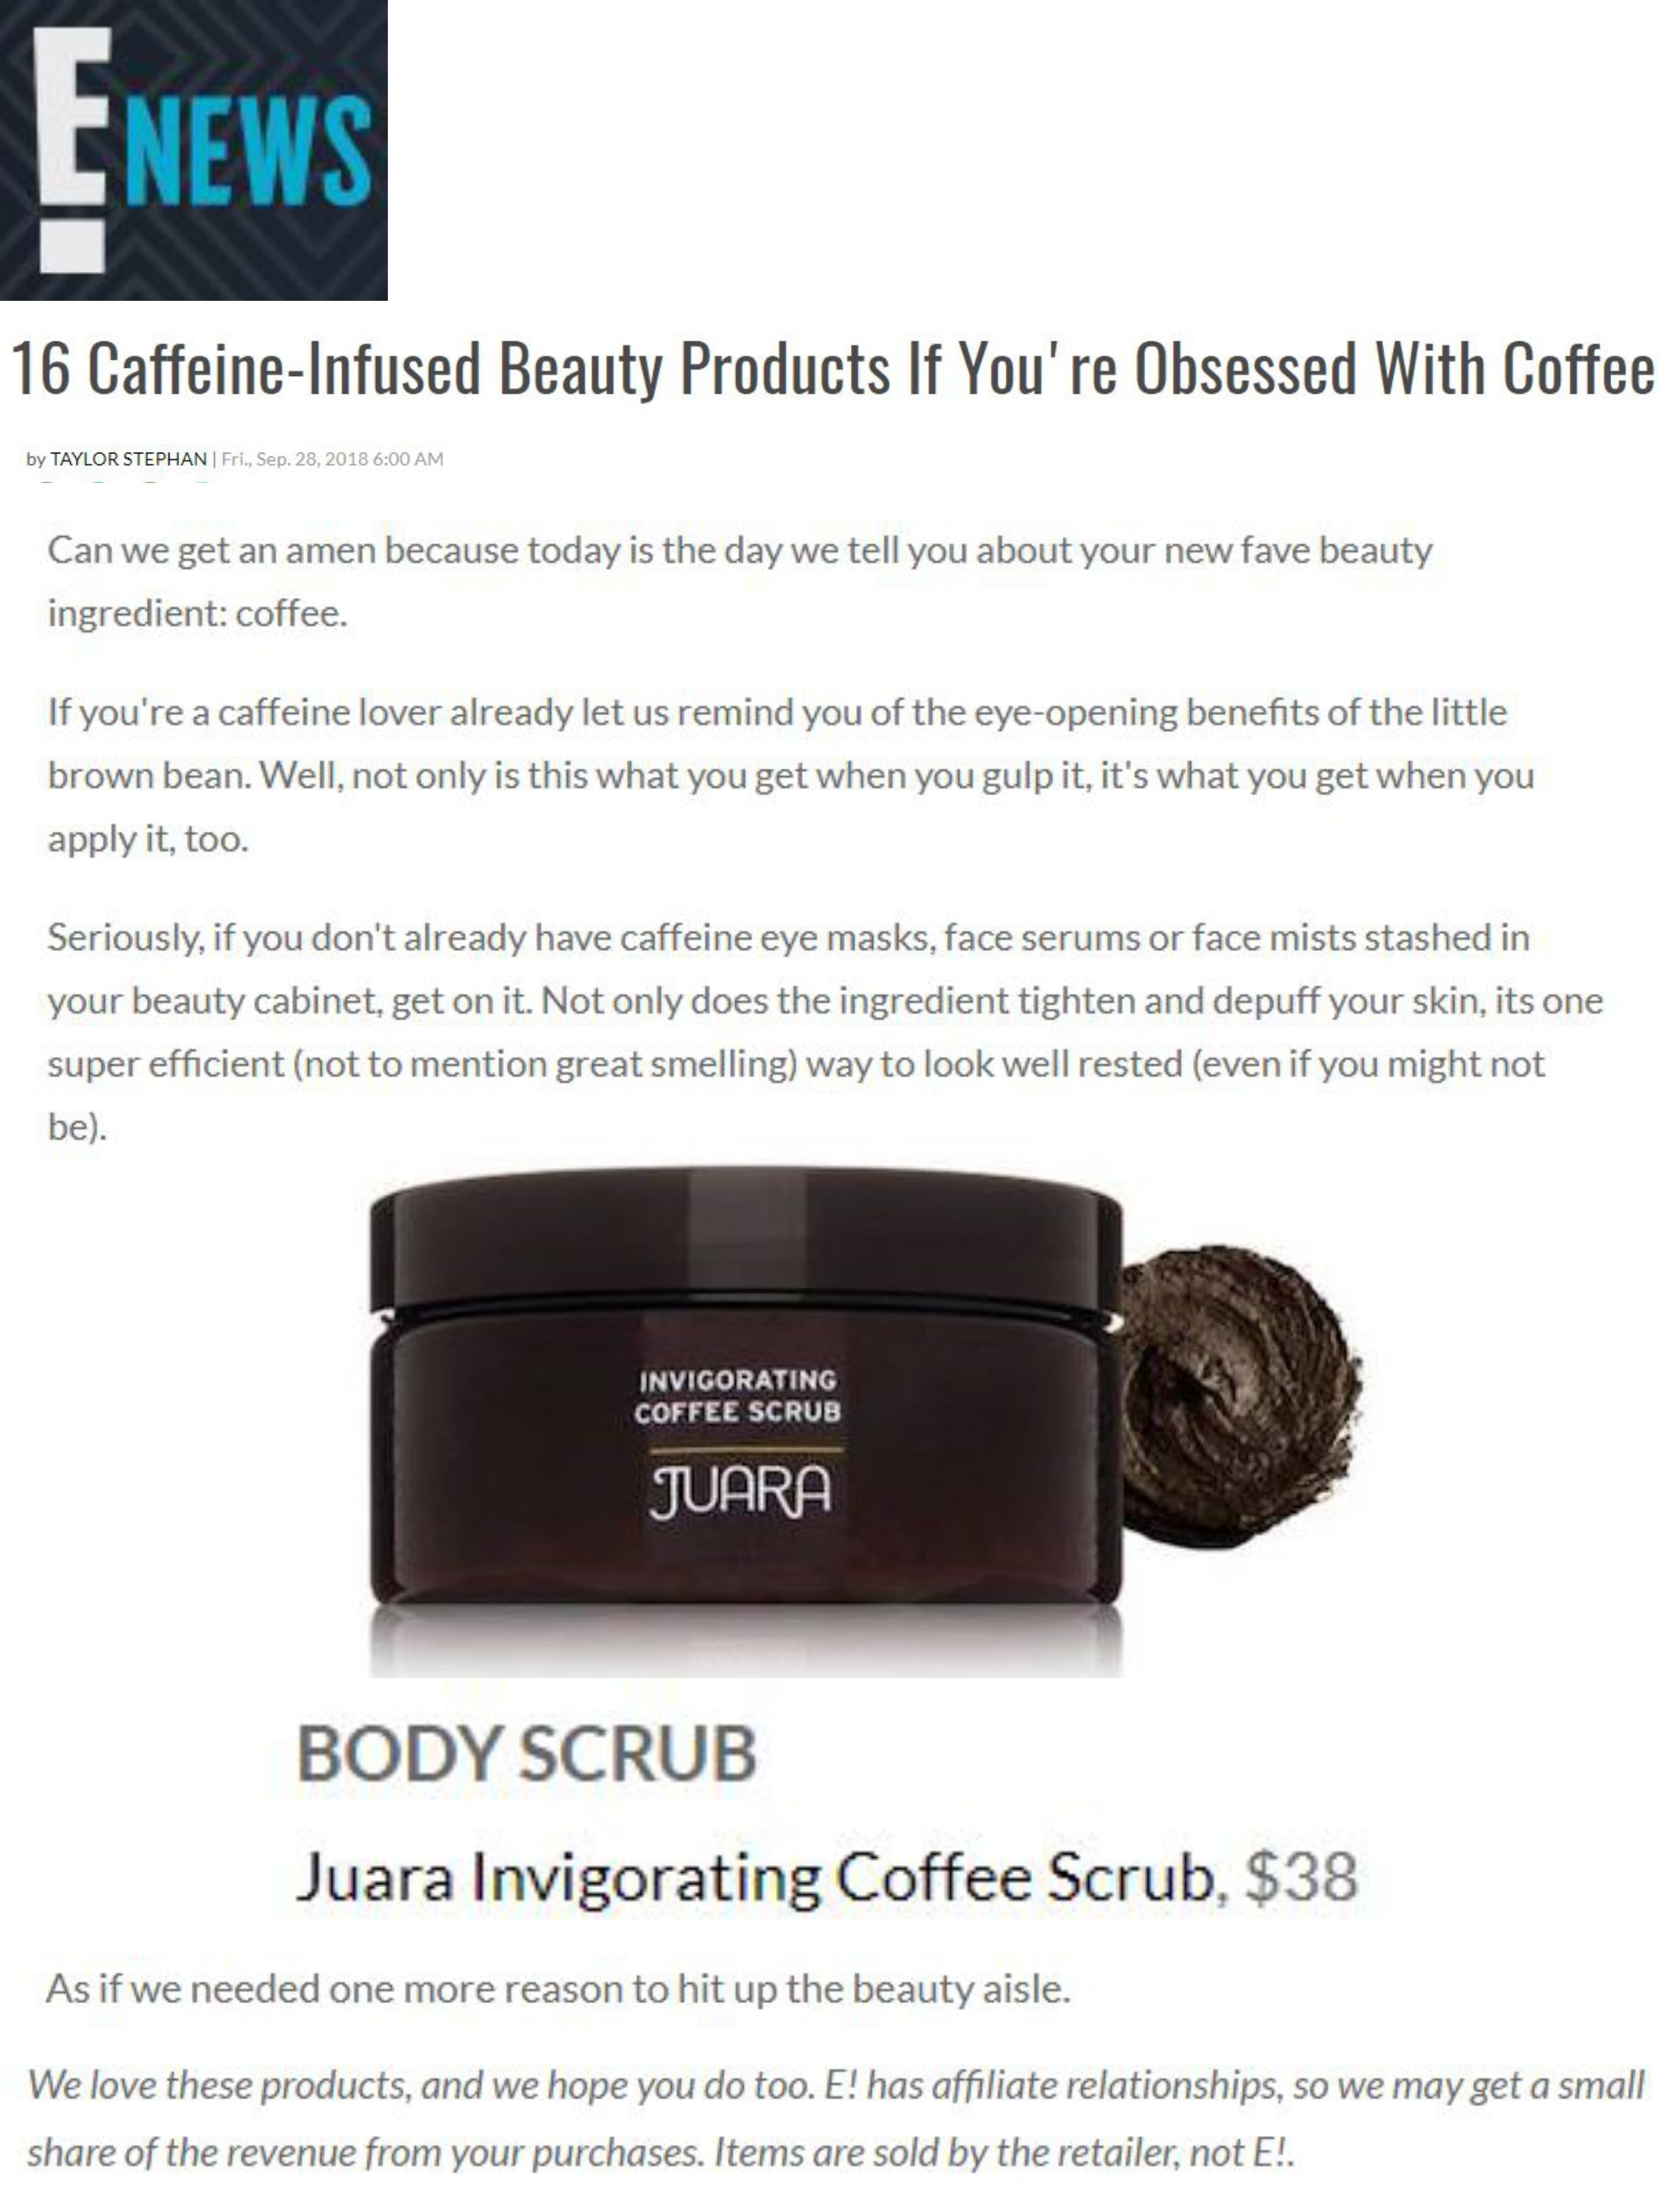 E NEWS : 16 Caffeine - Infused Beauty Products If You're Obsessed With Coffee JUARA Skincare